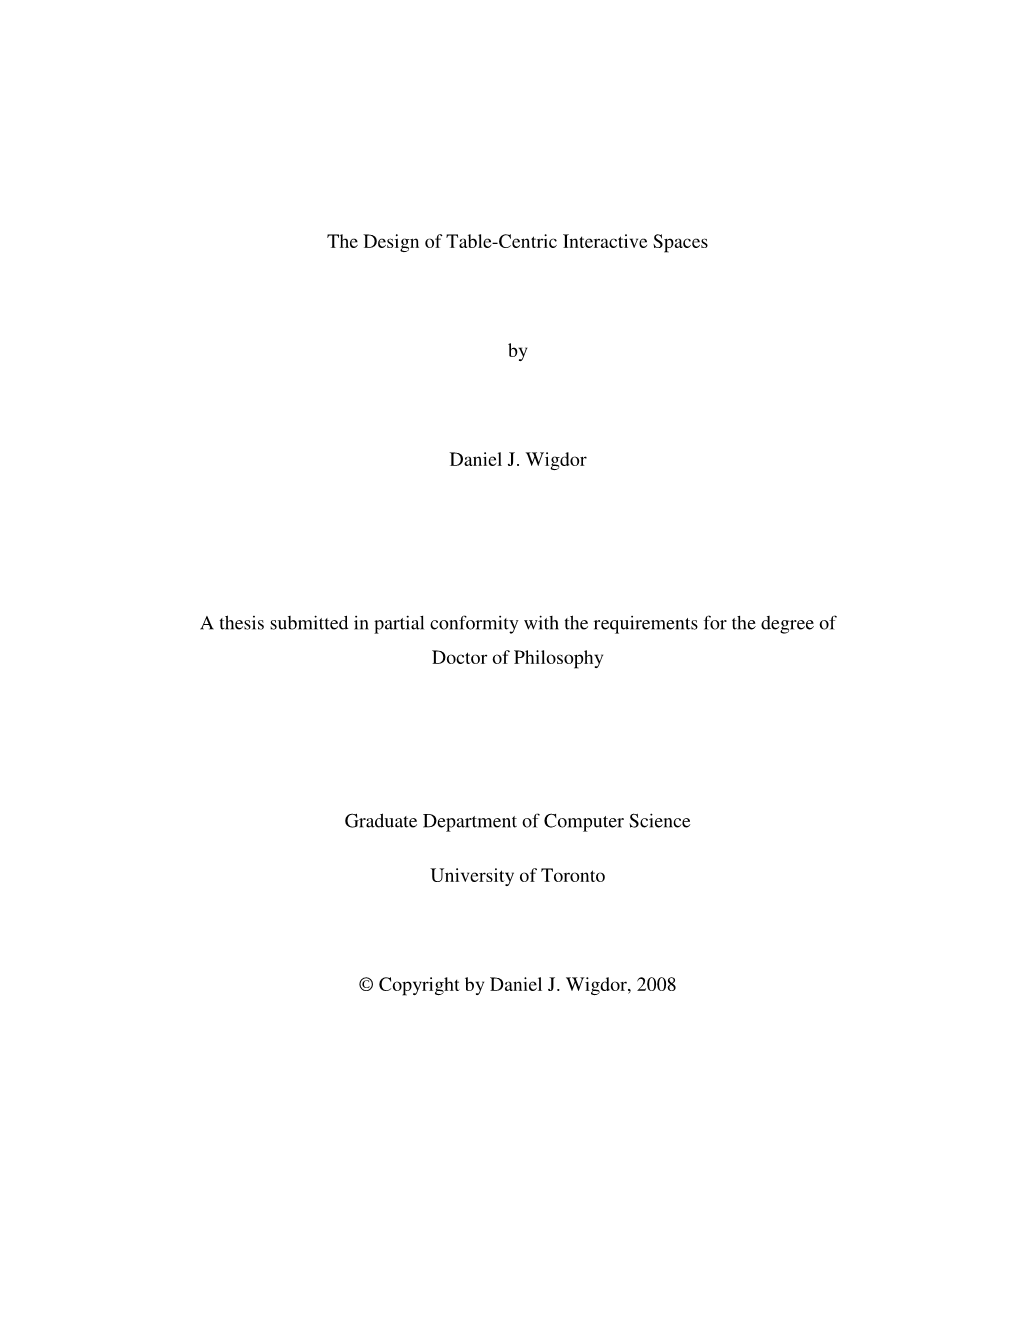 The Design of Table-Centric Interactive Spaces by Daniel J. Wigdor a Thesis Submitted in Partial Conformity with the Requirement